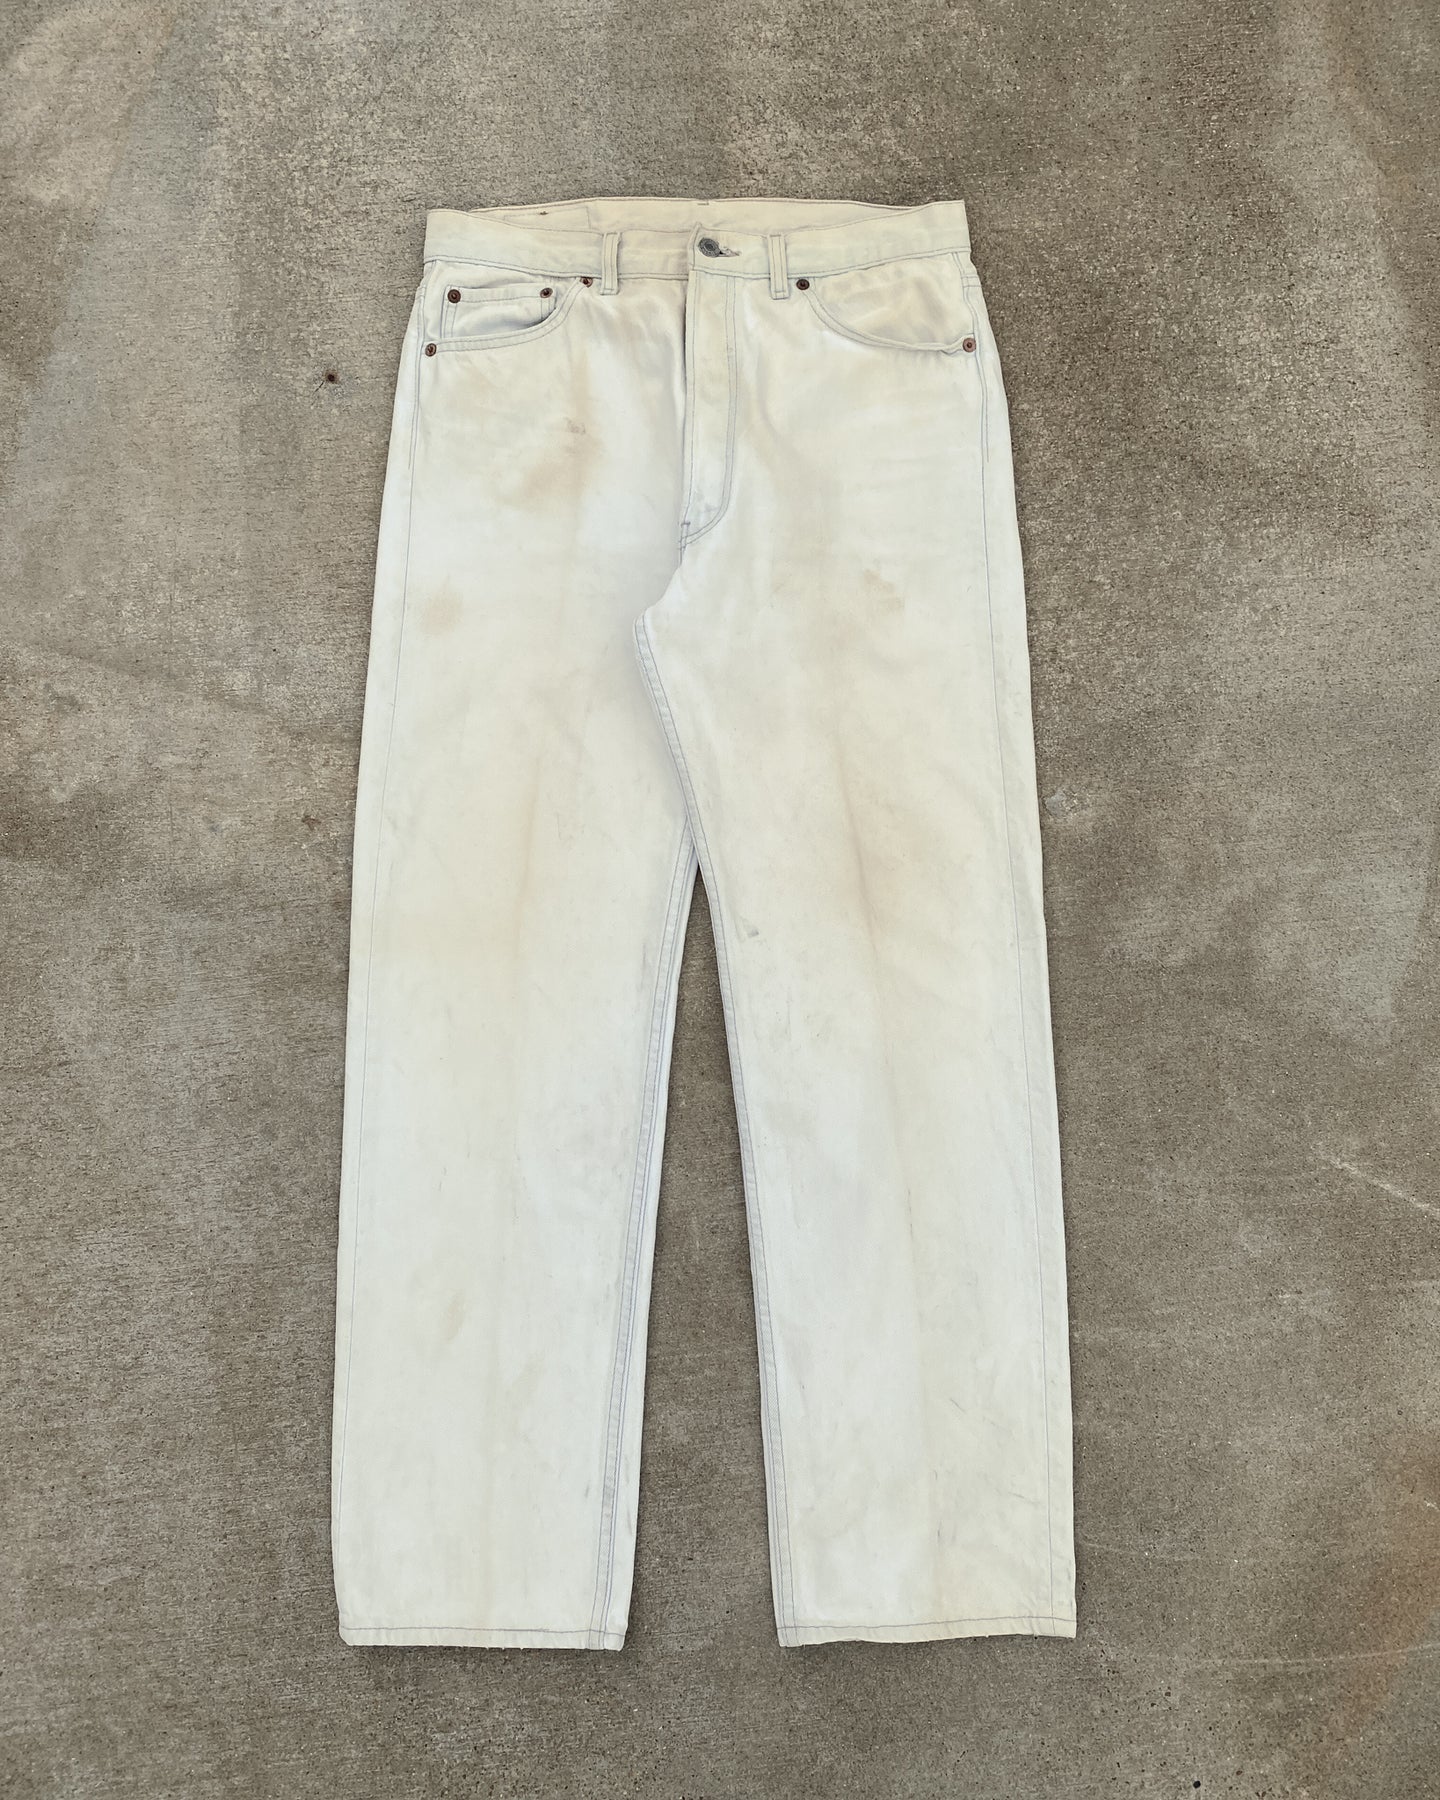 1990s Levi's Sand Stained Off-White 501 - Size 32 x 30